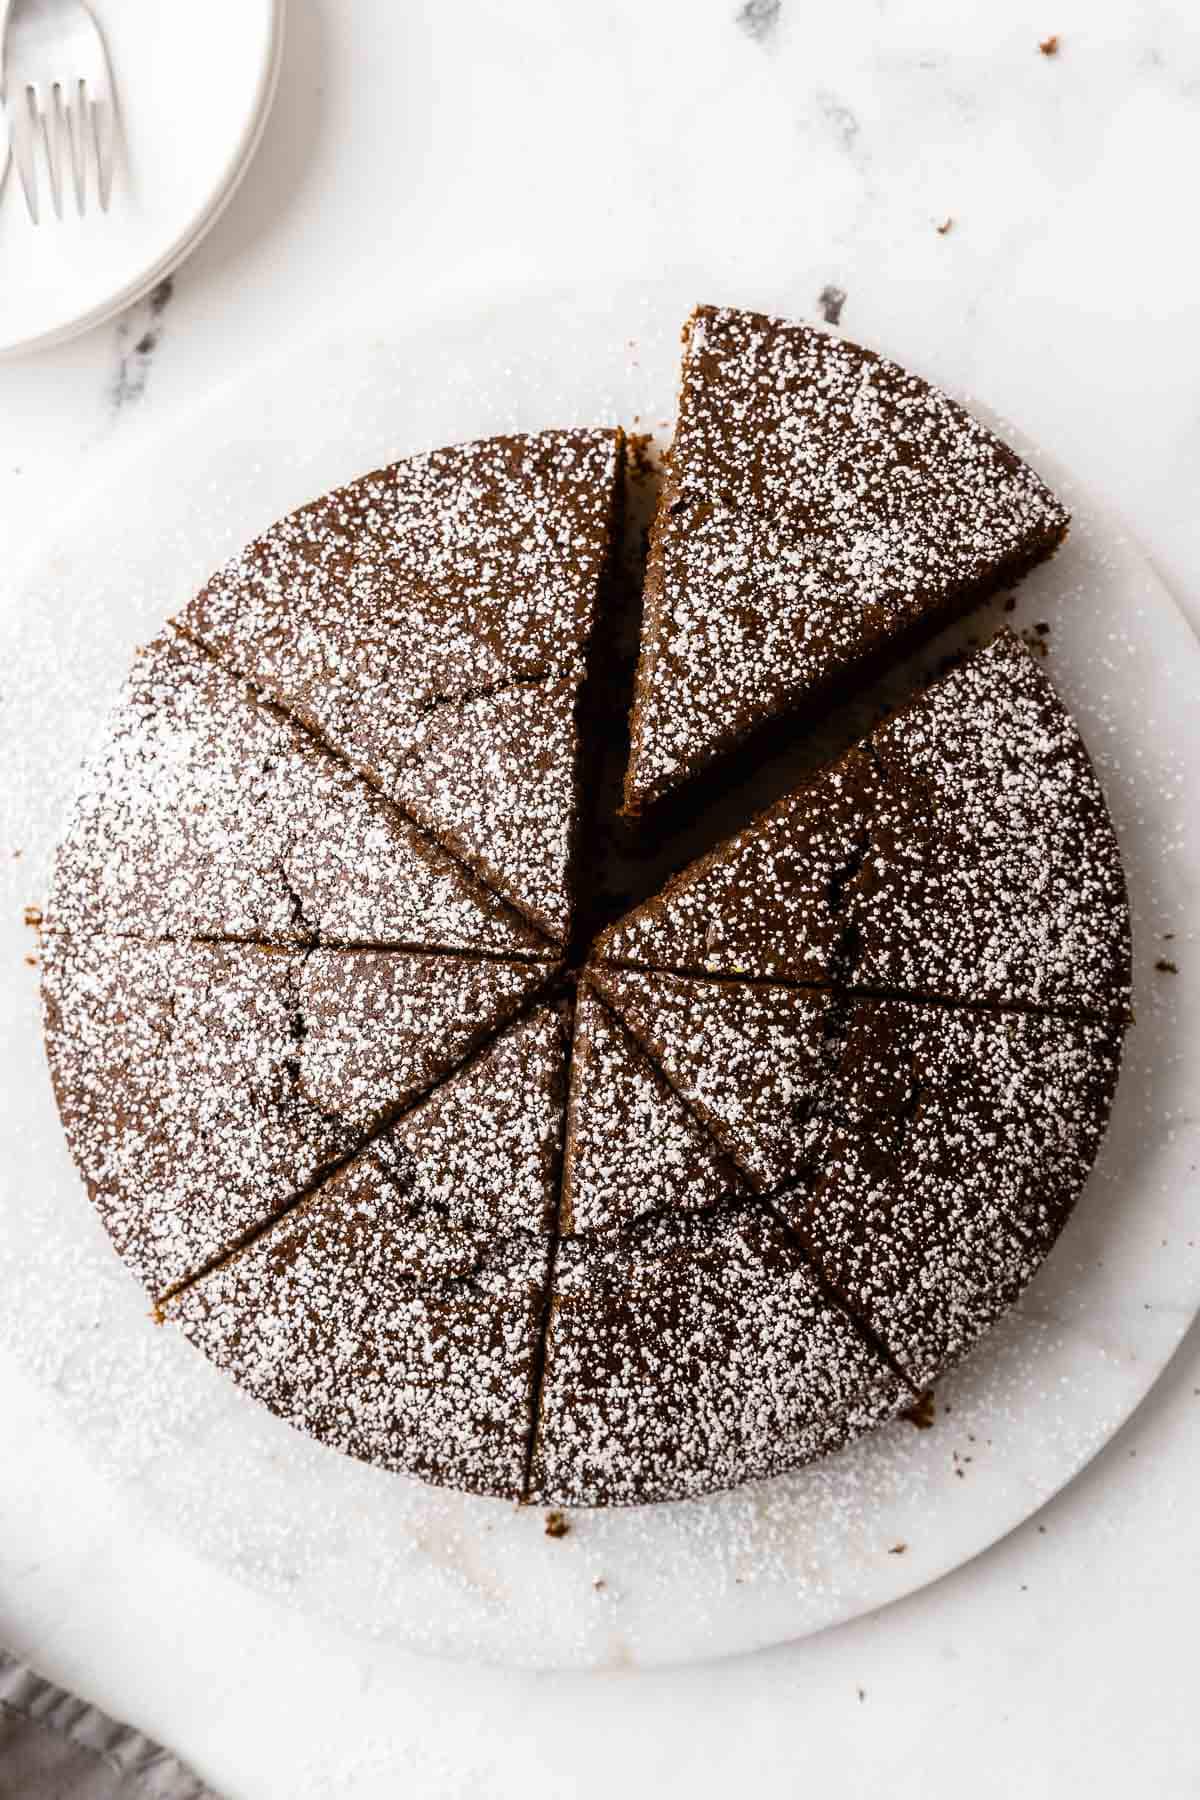 Overhead shot of chocolate olive oil cake cut into 8 slices and sprinkled with powdered sugar, sitting on marble with white plates and forks nearby.